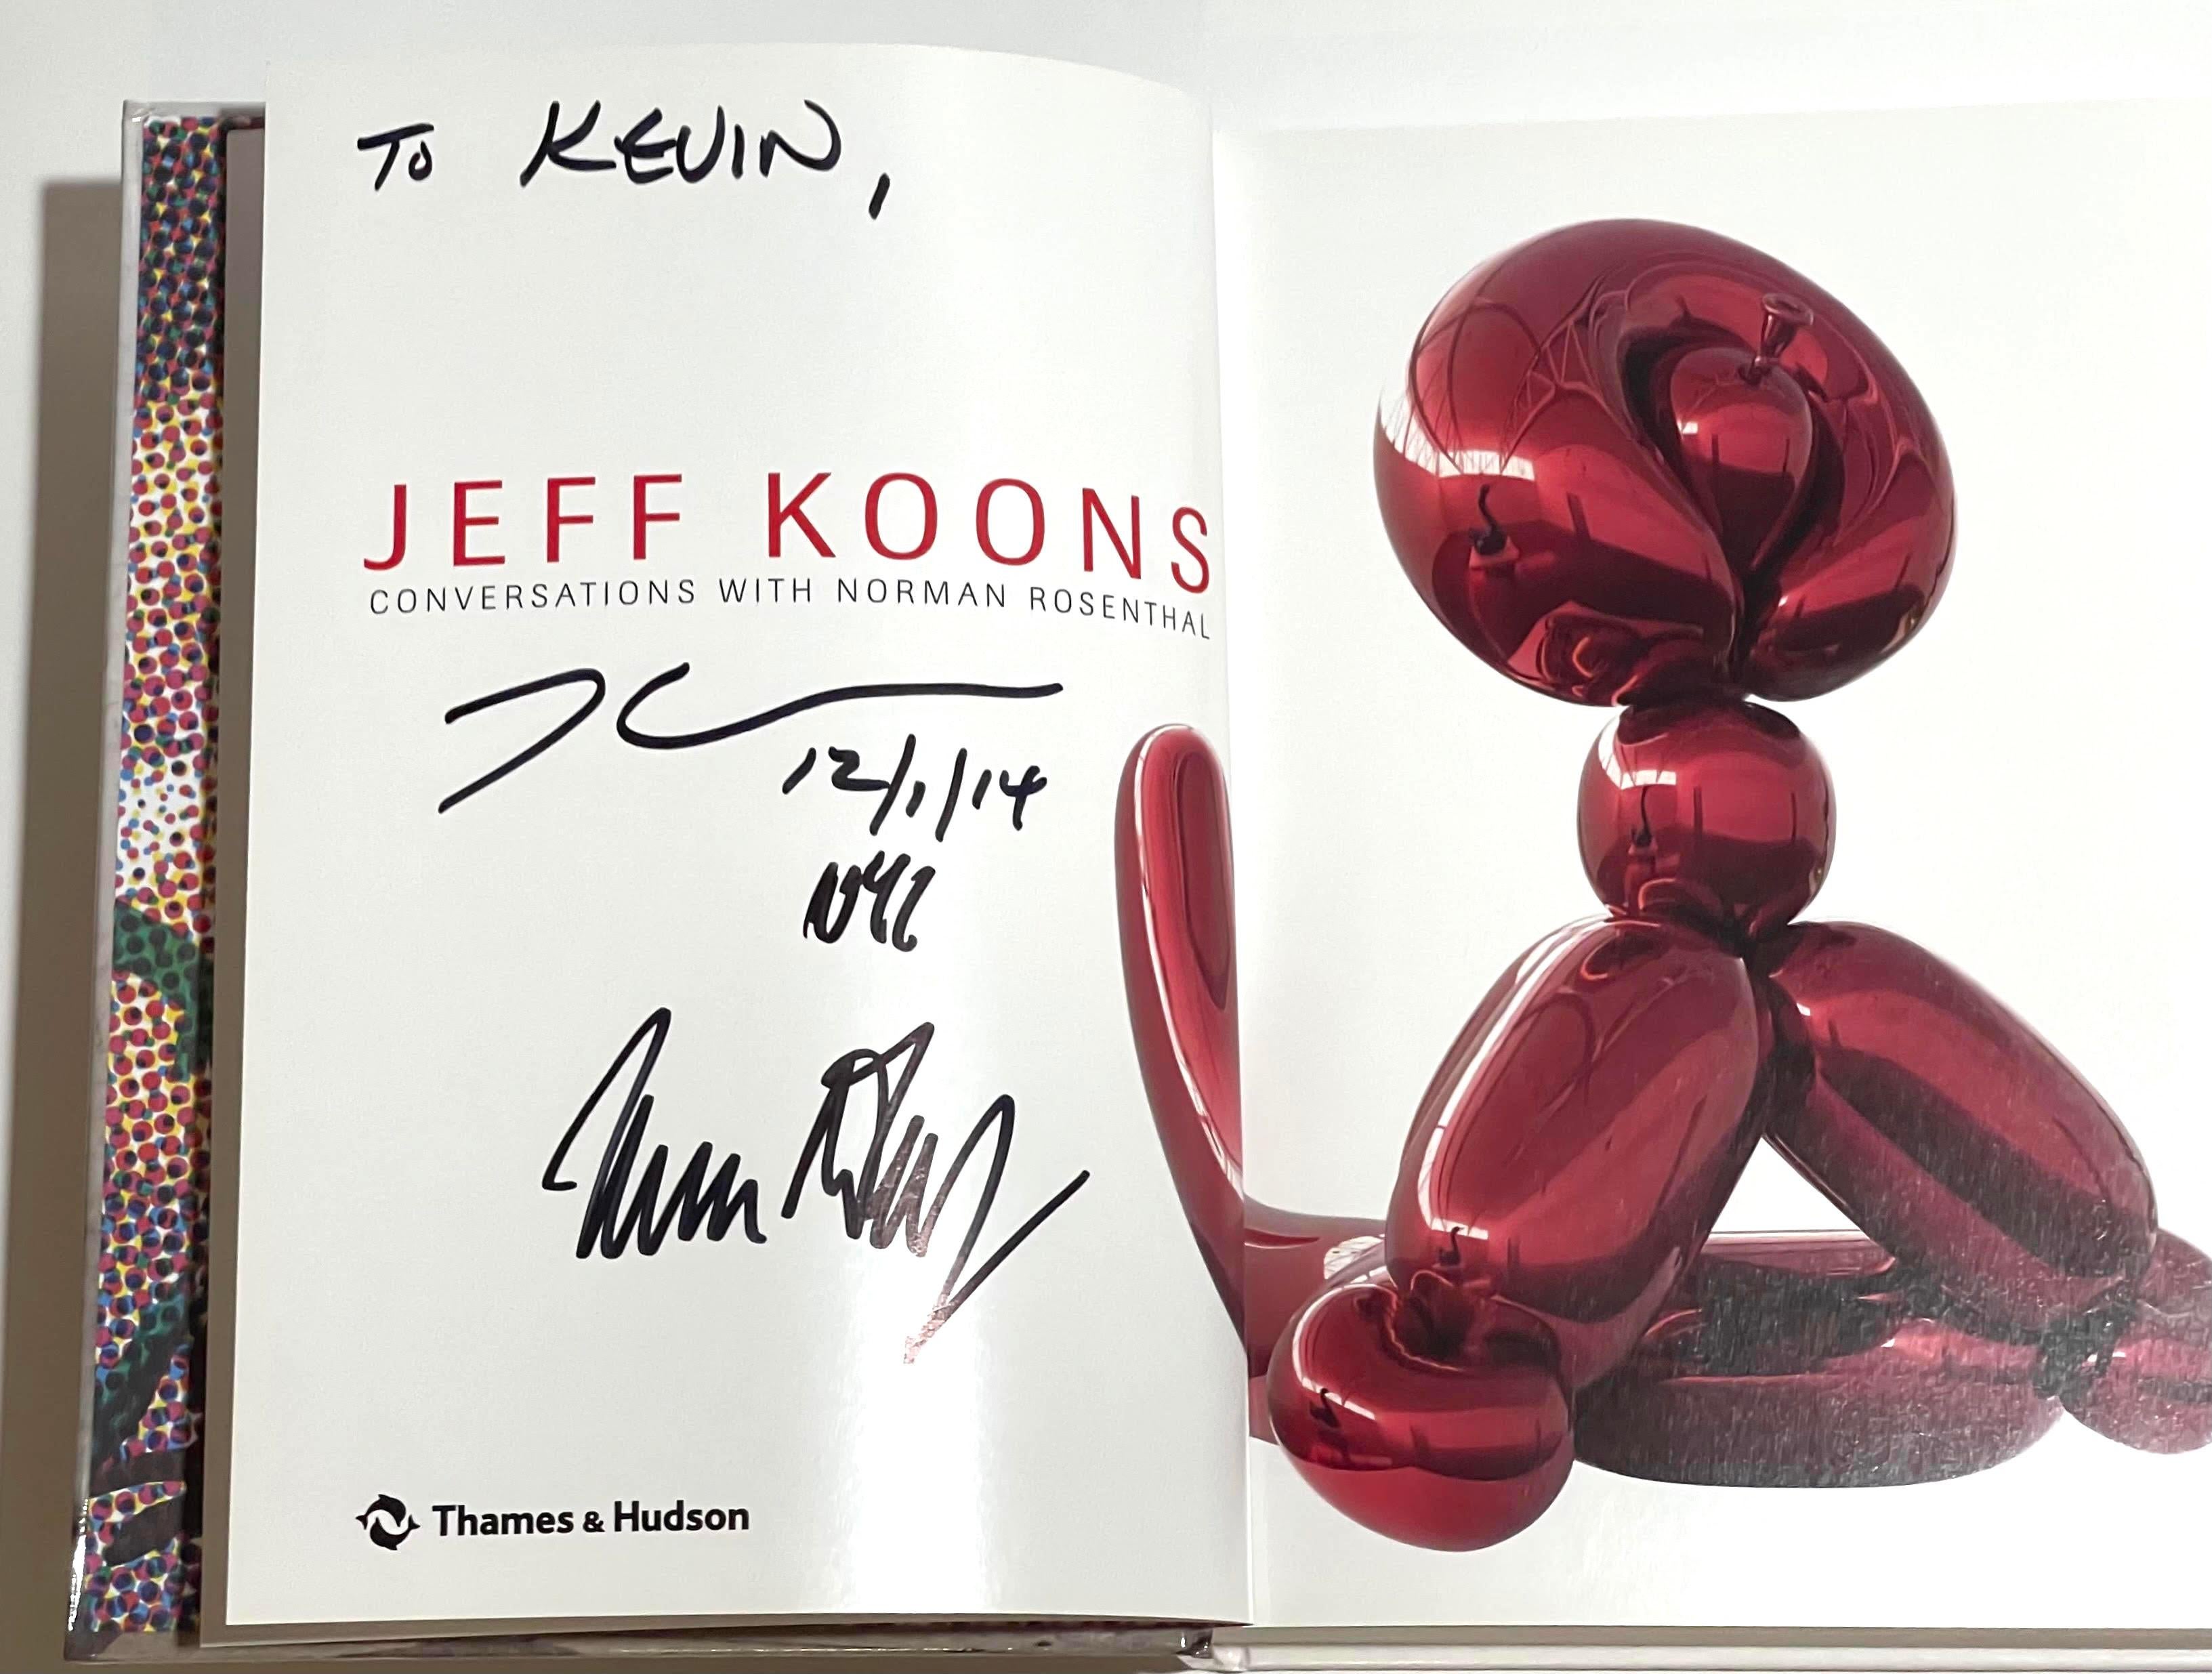 Jeff Koons Conversations with Norman Rosenthal (Hand signed and inscribed by BOTH Jeff Koons and Norman Rosenthal), 2014
Hardback monograph (hand signed, dated and inscribed)
Hand signed, dated and inscribed by Jeff Koons AND Norman Rosenthal to